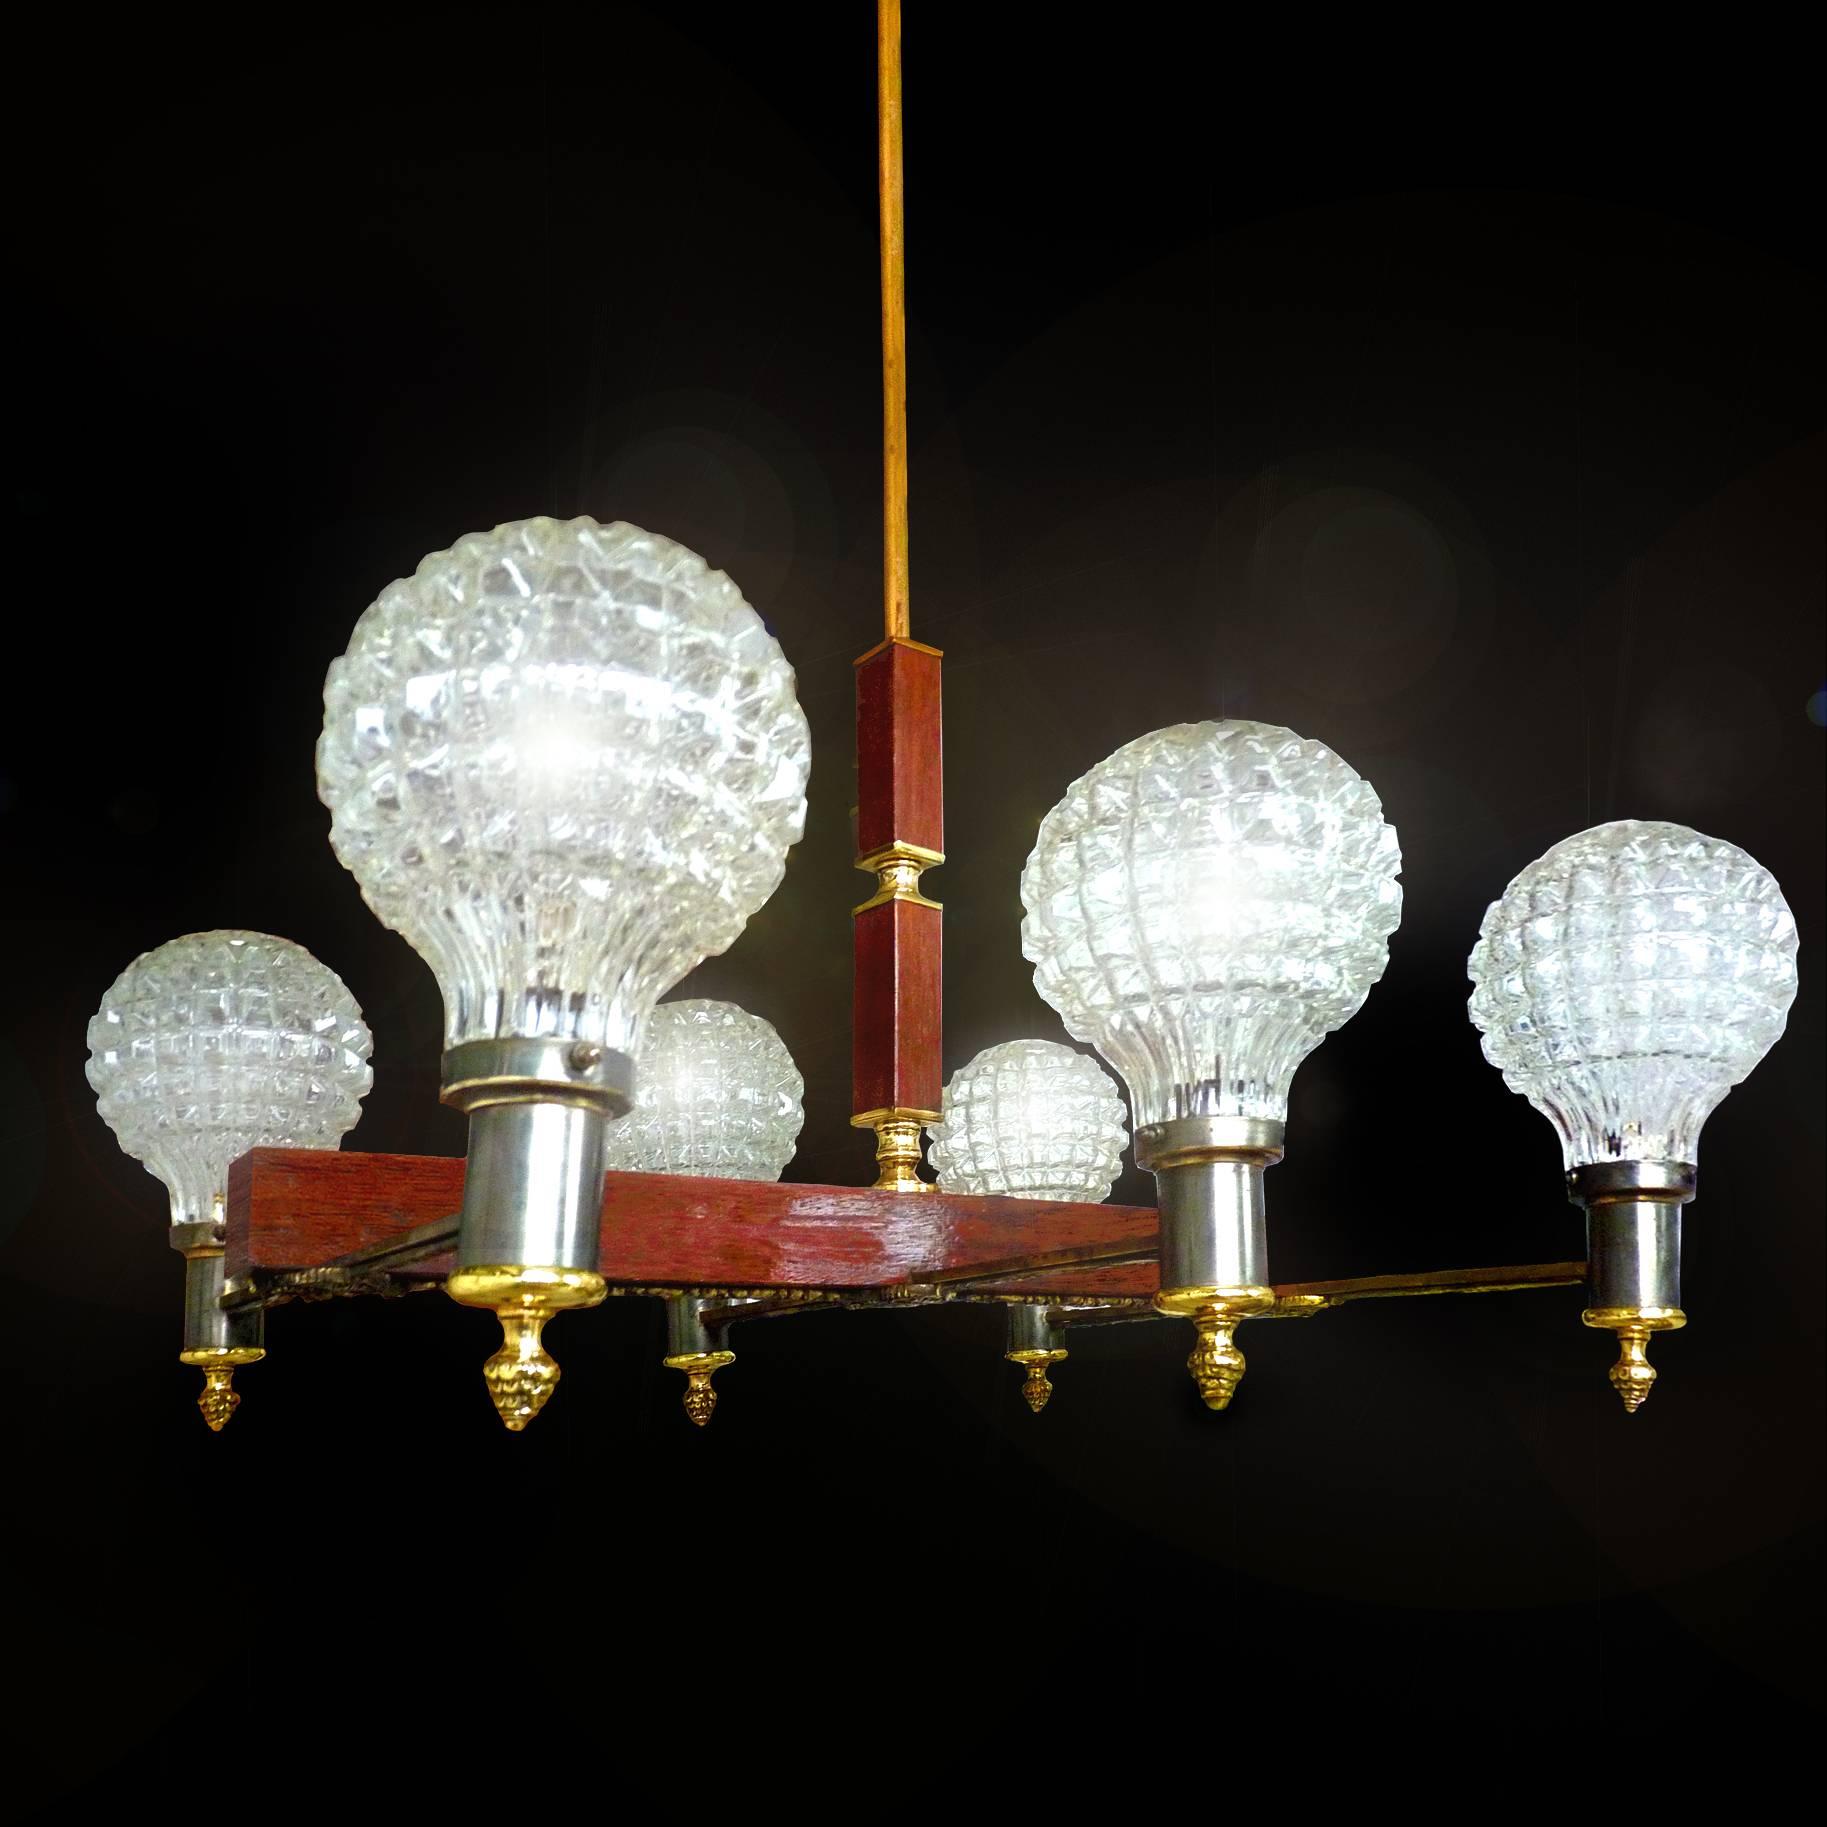 French Art Deco engraved bronze on wood six ice glass shades chandelier, circa 1950.
6-light bulbs E-14, good working condition
Assembly required. Bulbs not included.